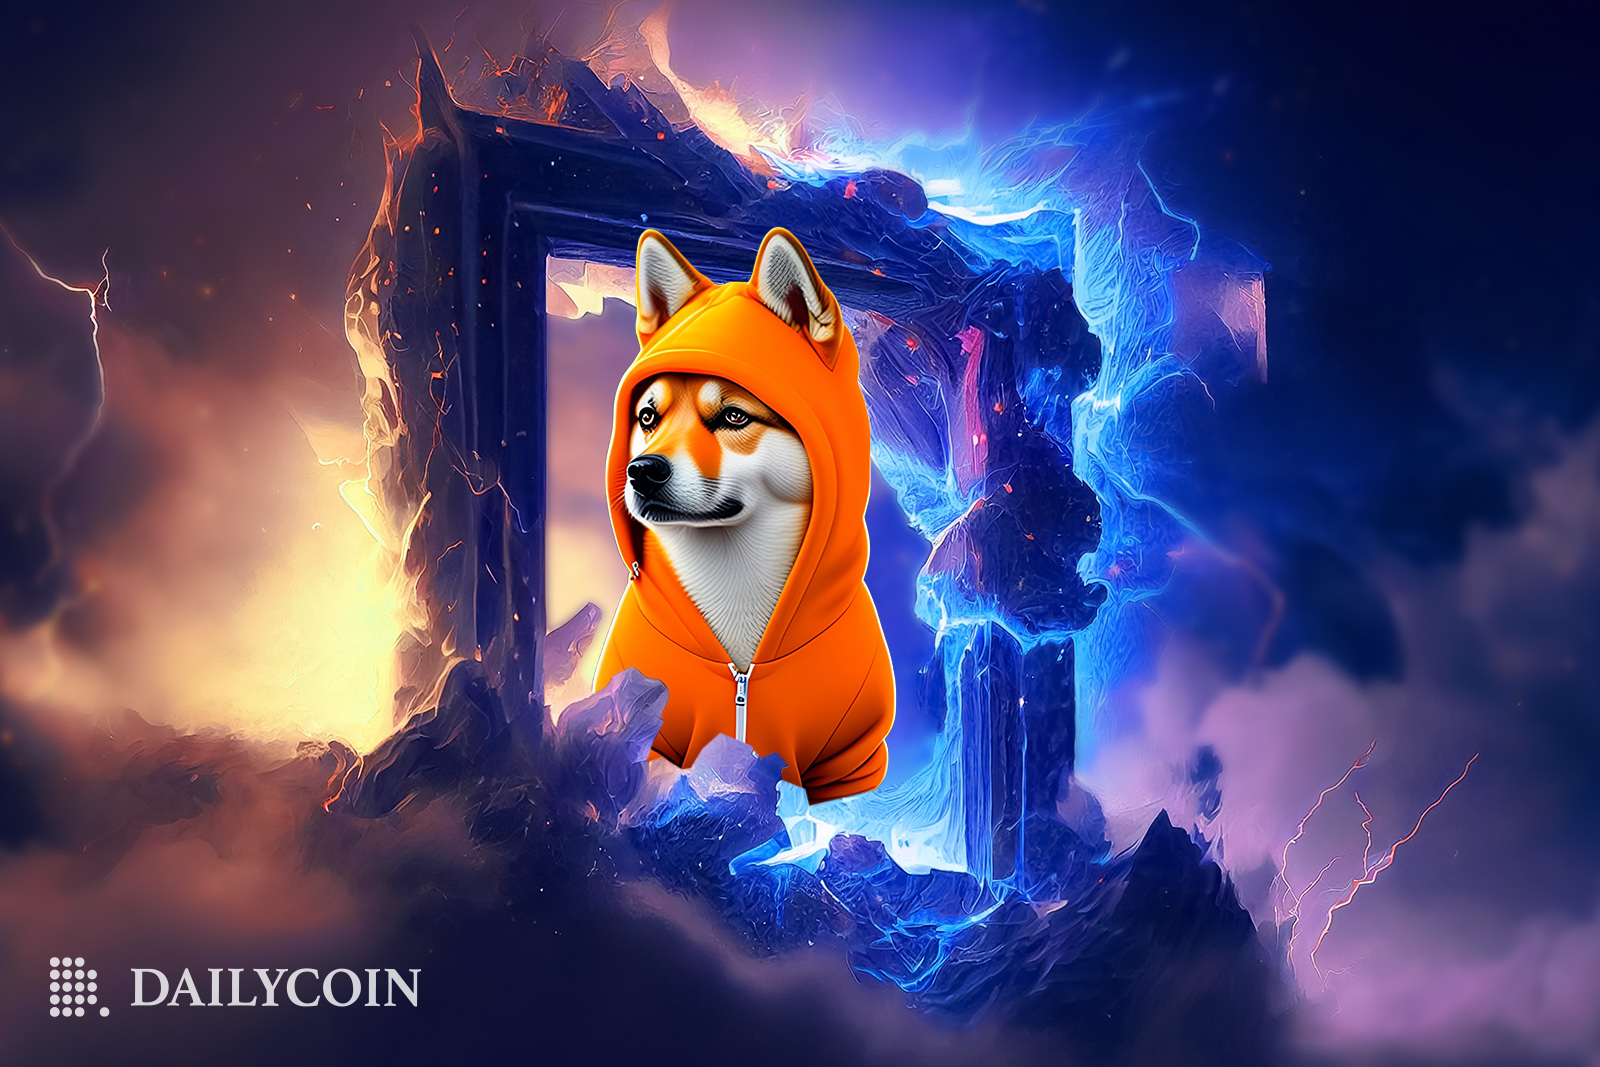 Shiba Inu dog in an orange hoodie looking through a frame in the skies, ready to invite people to Shibarium.